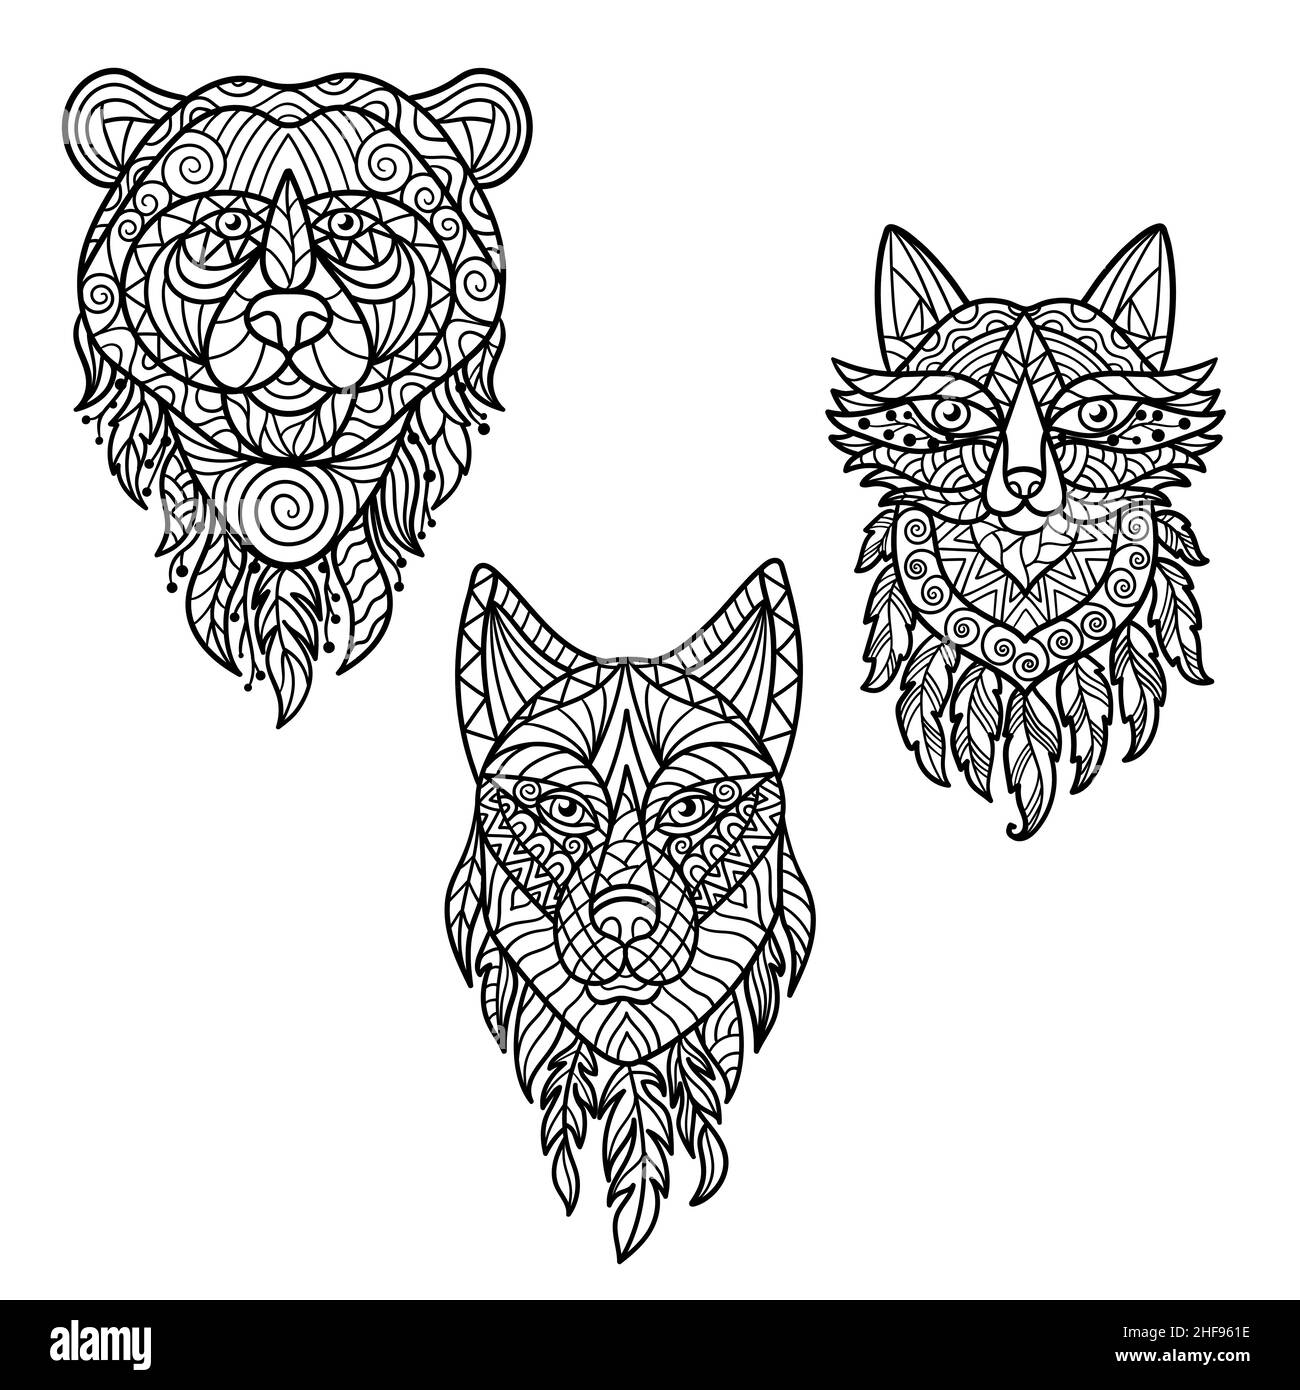 Vector coloring page with a set of abstract forest animals: bear, wolf, fox with patterns in ethnic style, zen art Stock Vector